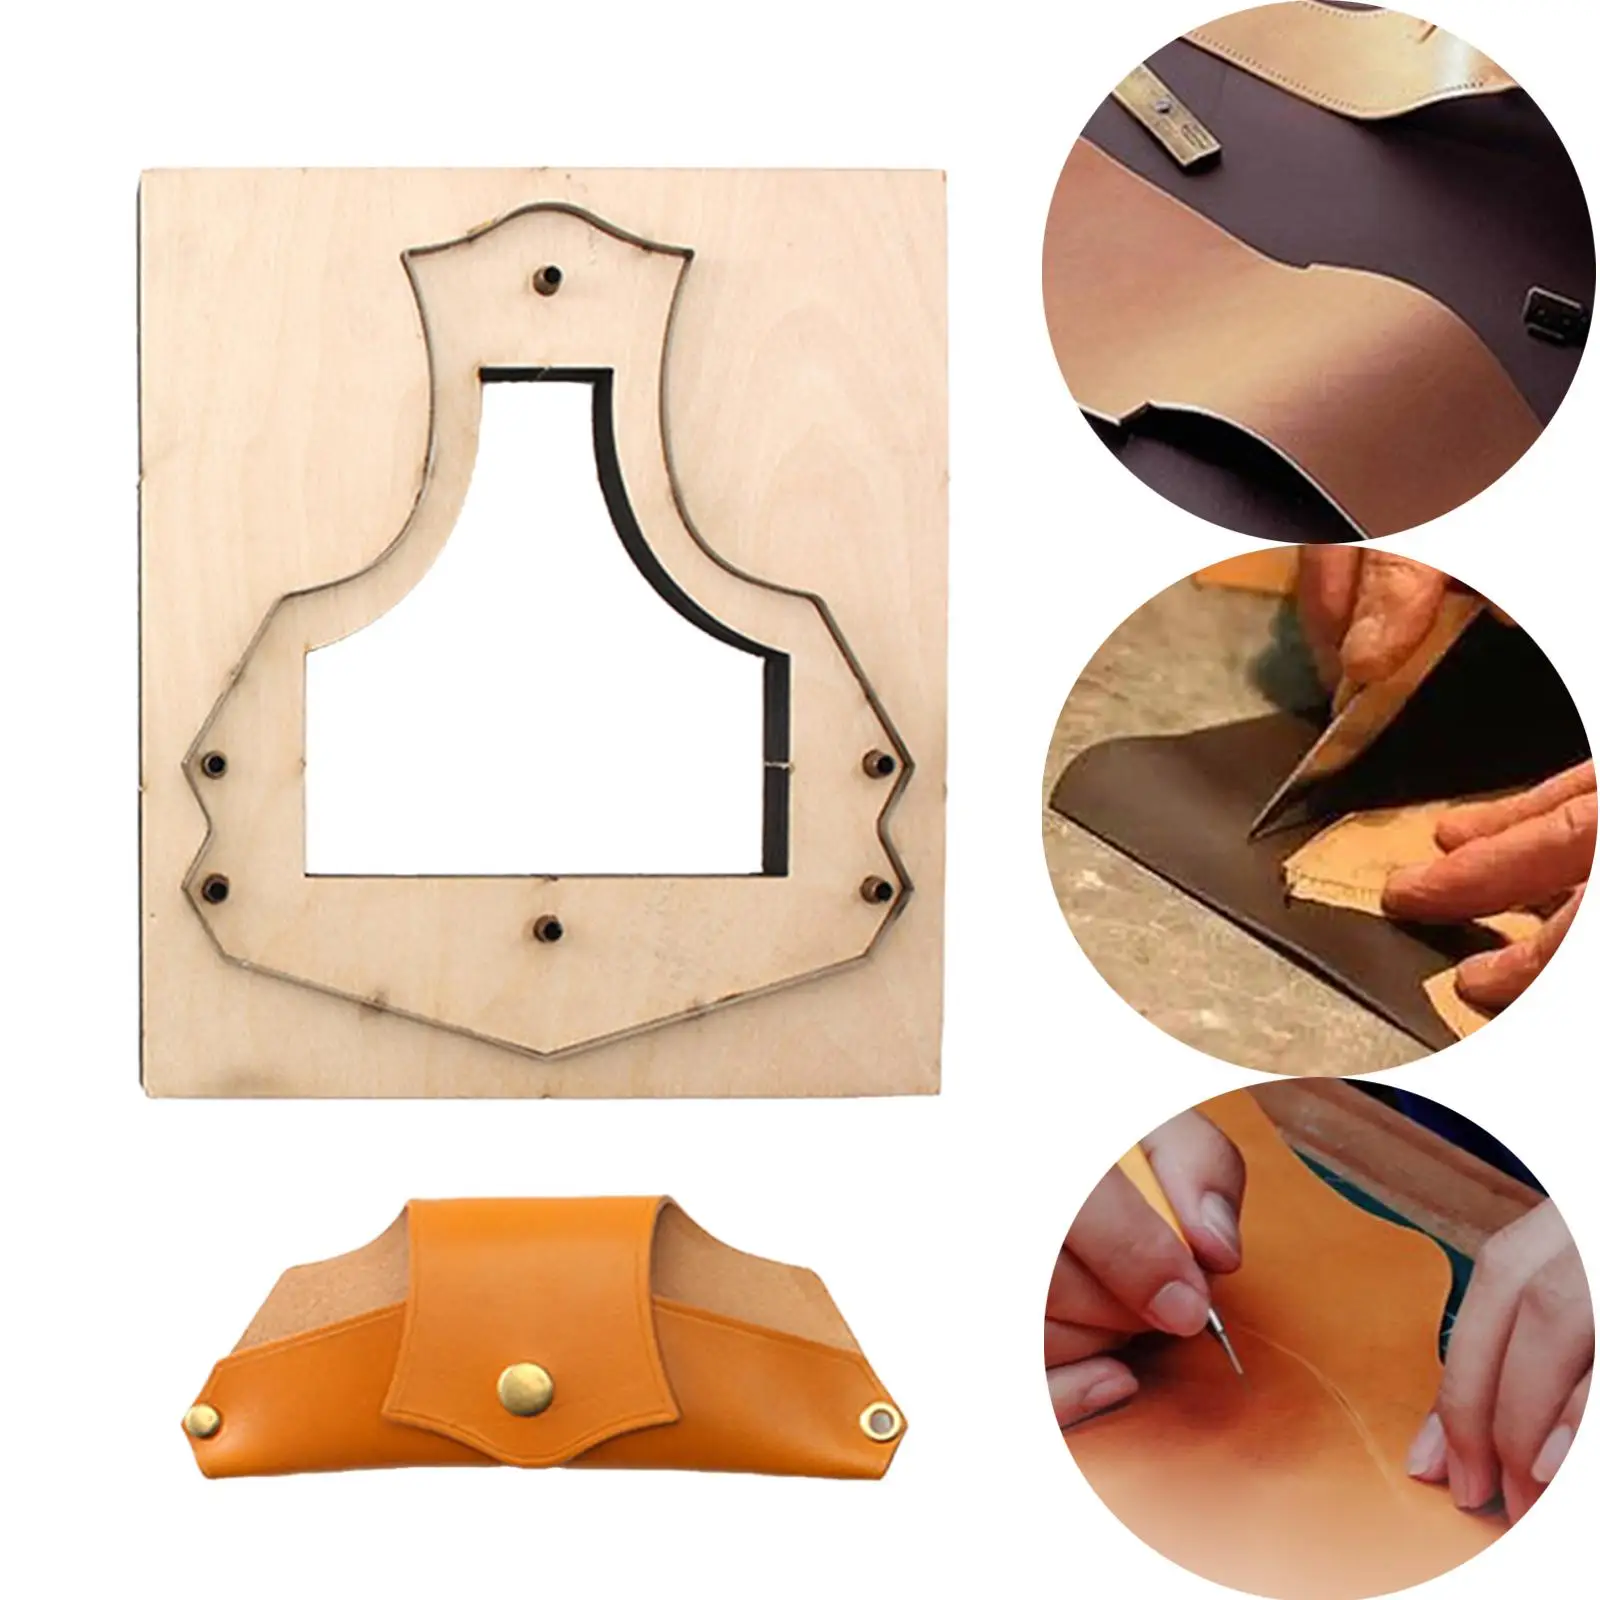 Glasses Bag Die Cutting Mold Wooden Metal Blade Handmade Punch Tool Leather Cutting Mold Leather Glasses Case Template Fittings